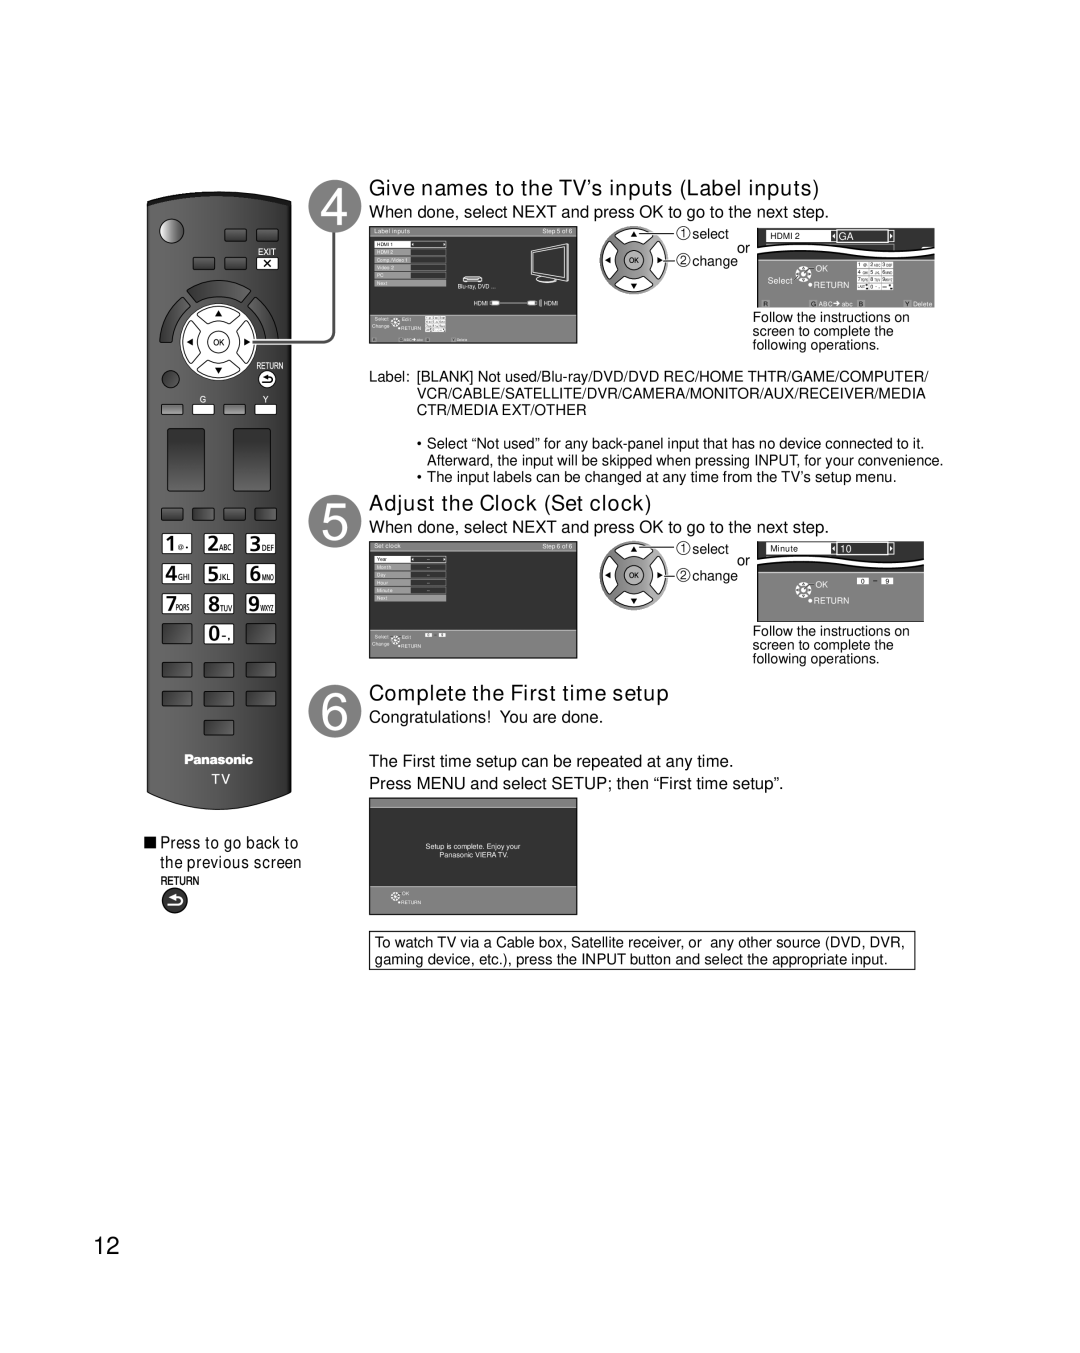 Panasonic TC-32LX34 Give names to the TV’s inputs Label inputs, Adjust the Clock Set clock, Complete the First time setup 